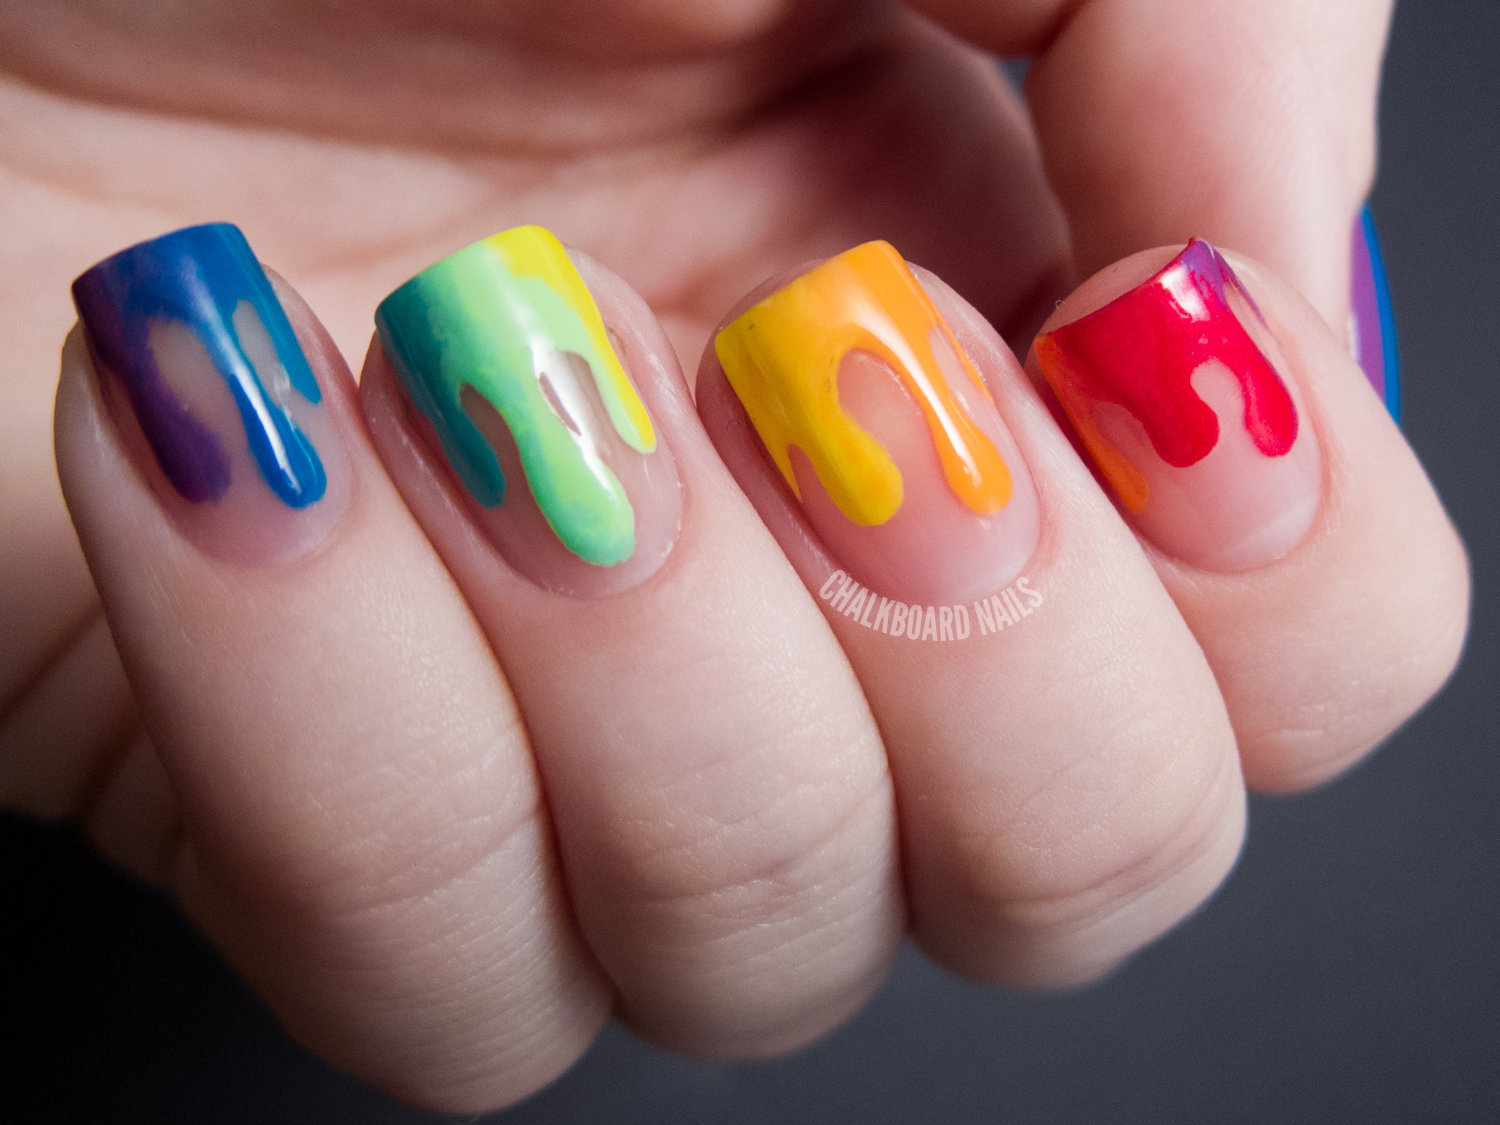 Special and Colorful Nail Art Using a Needle - DIY - AllDayChic